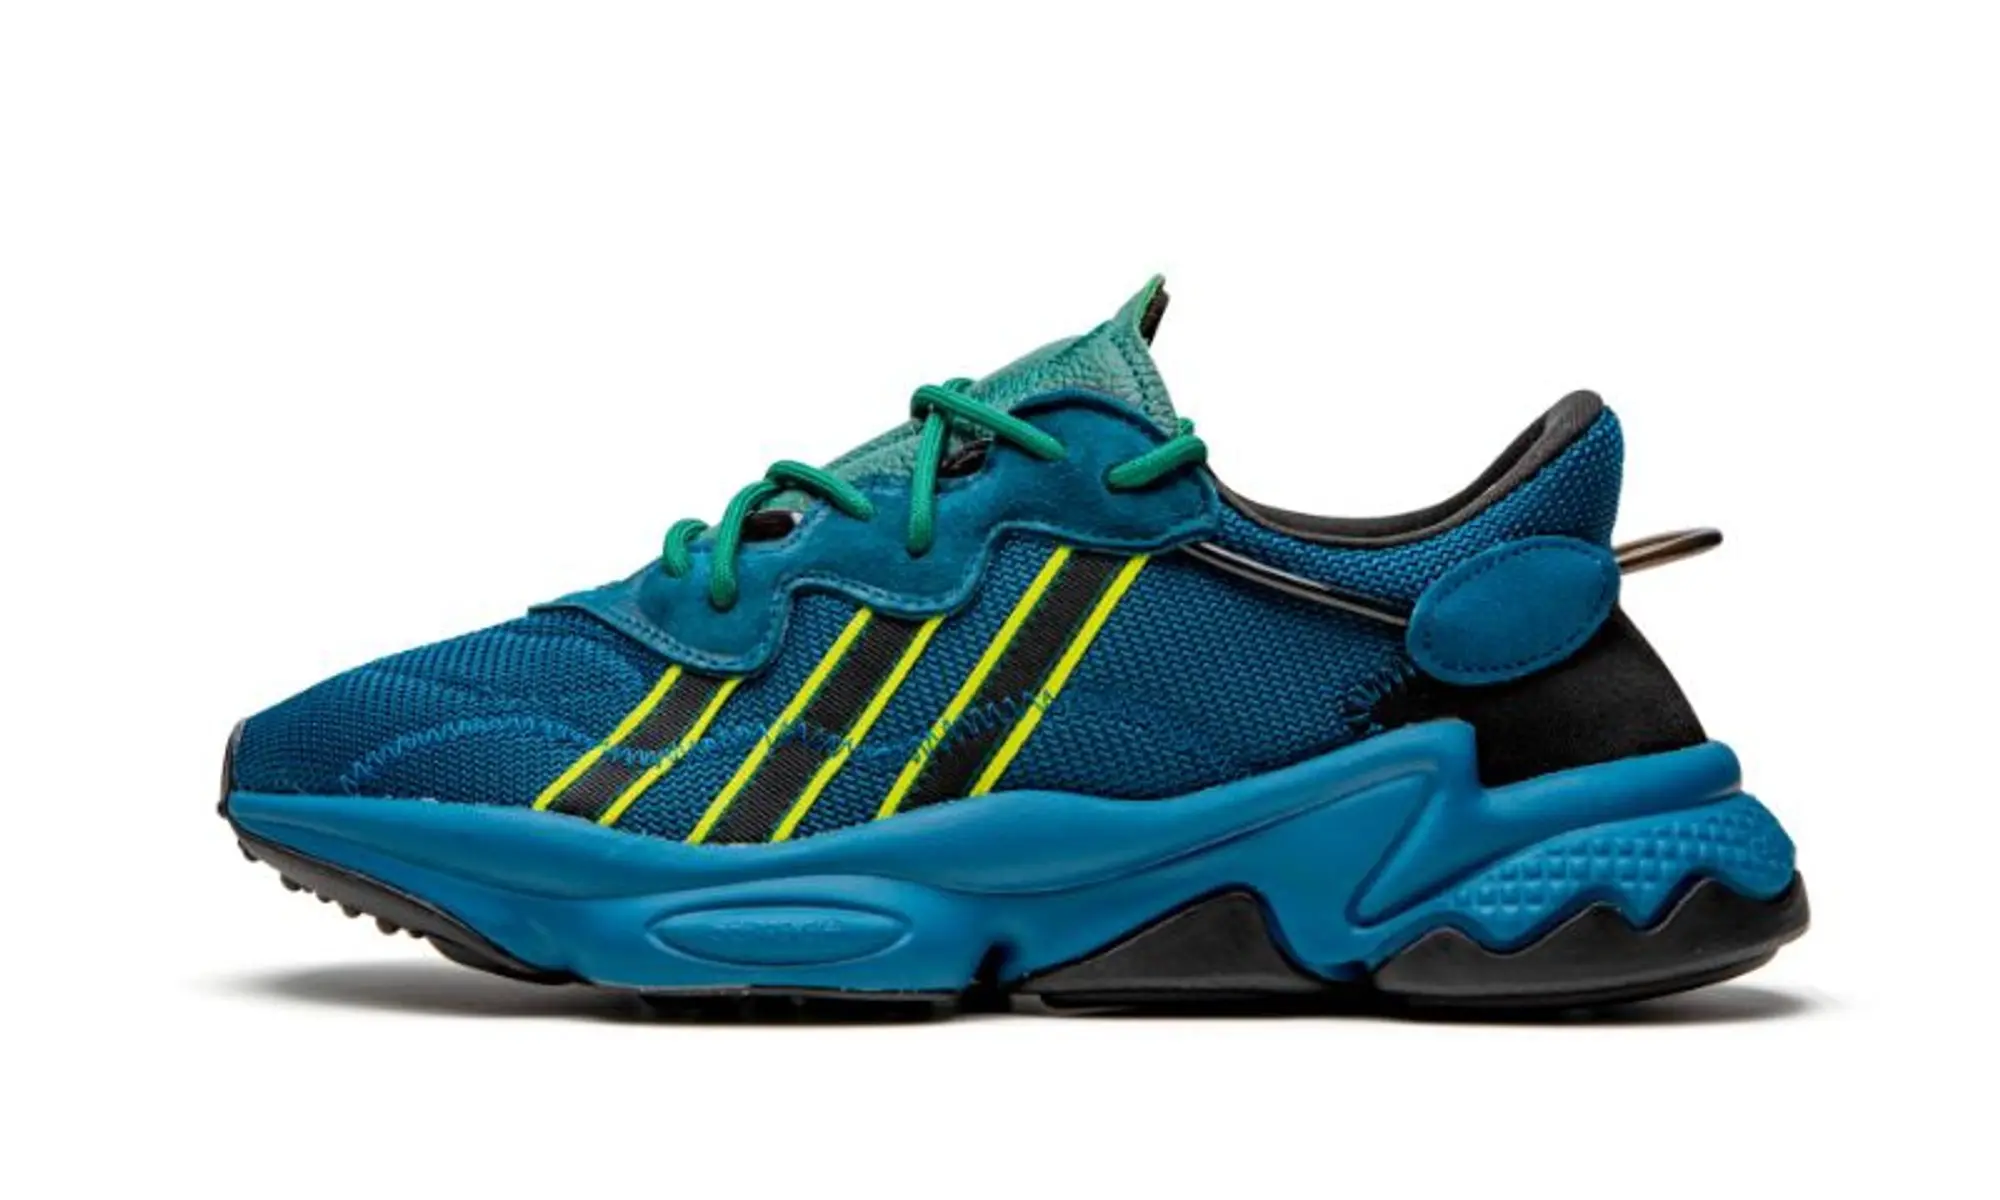 Adidas Ozweego Pusha T - Tech Mineral Shoes